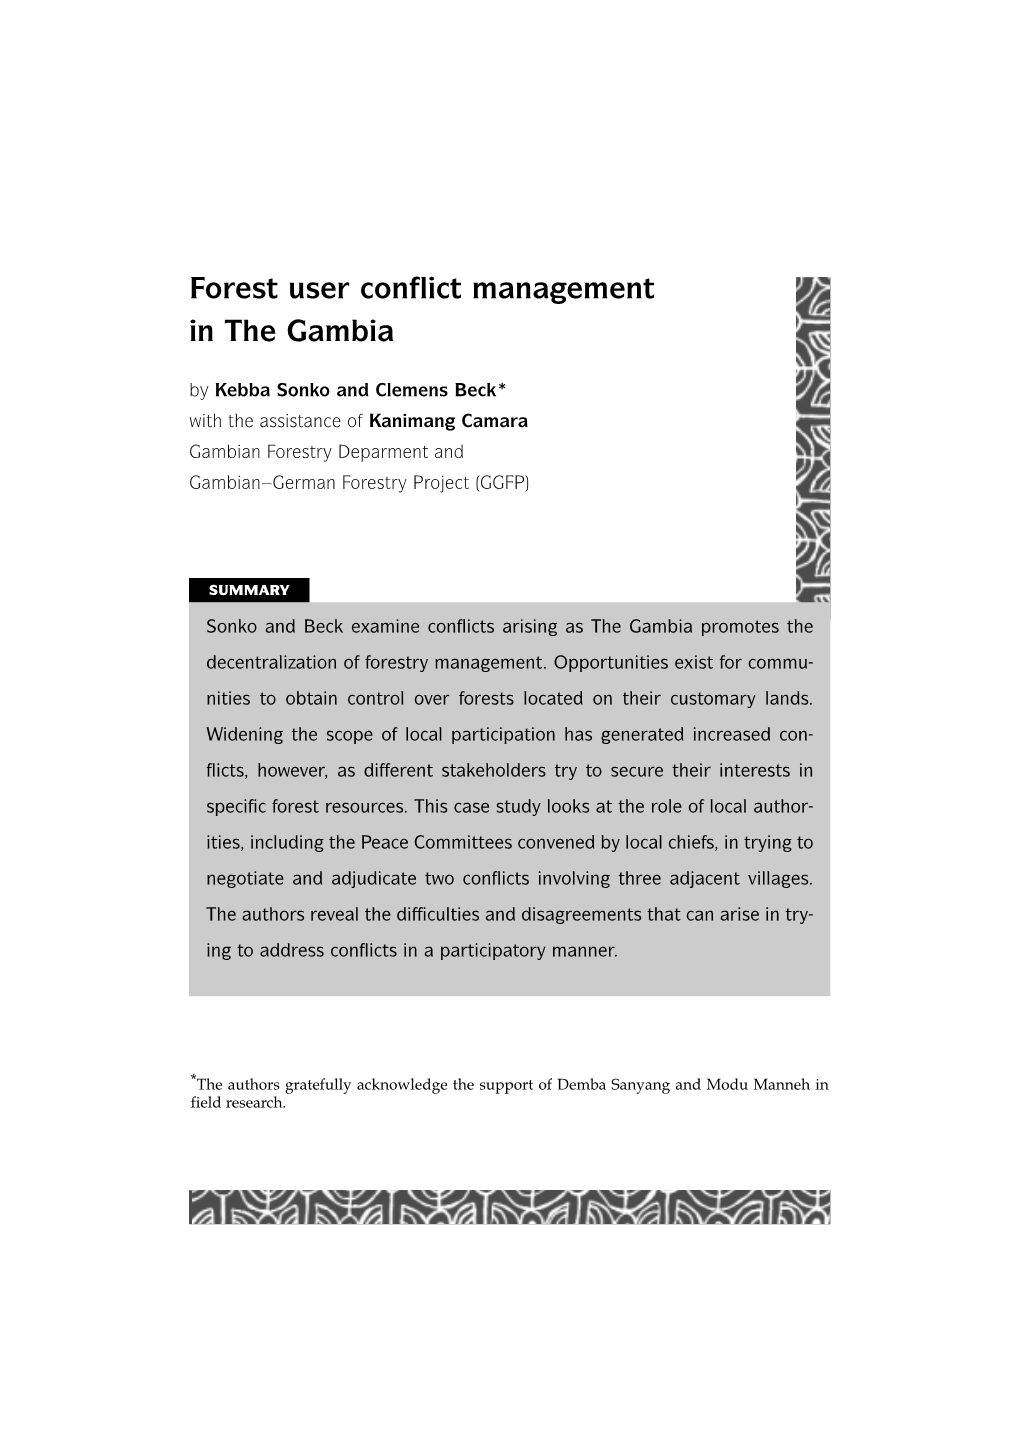 Forest User Conflict Management in the Gambia